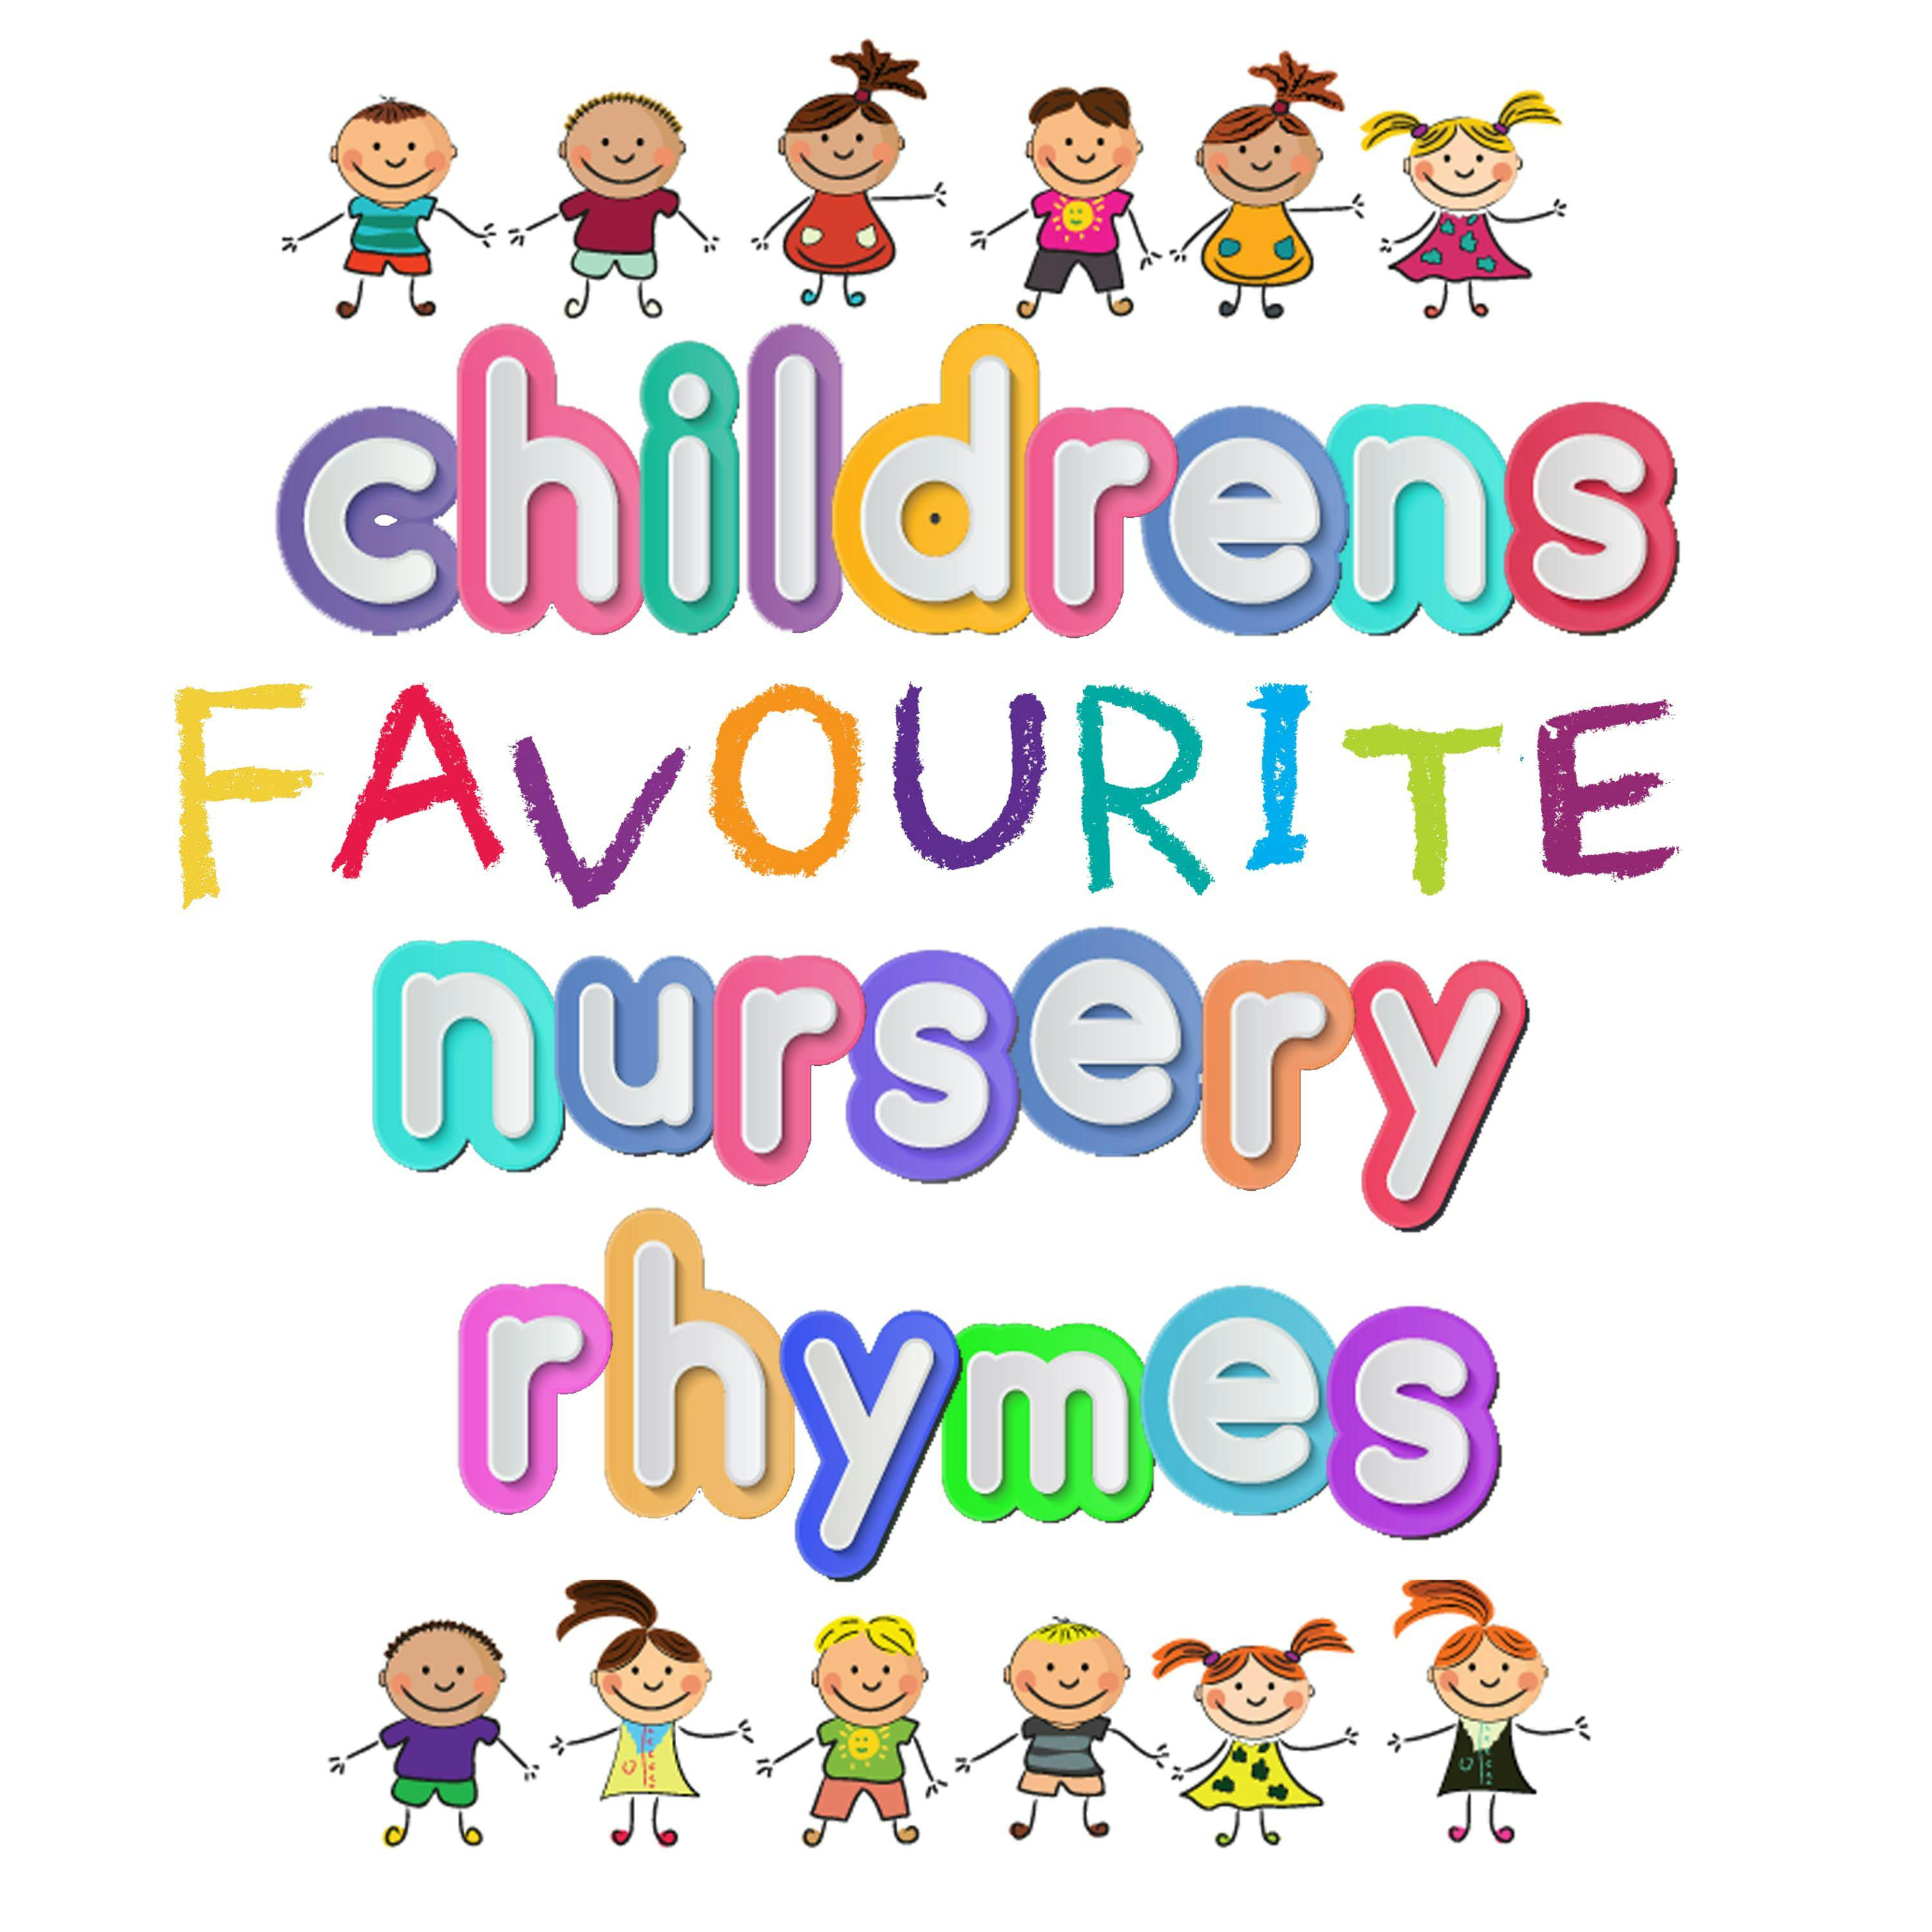 Children's Favourite Nursery Rhymes - Traditional